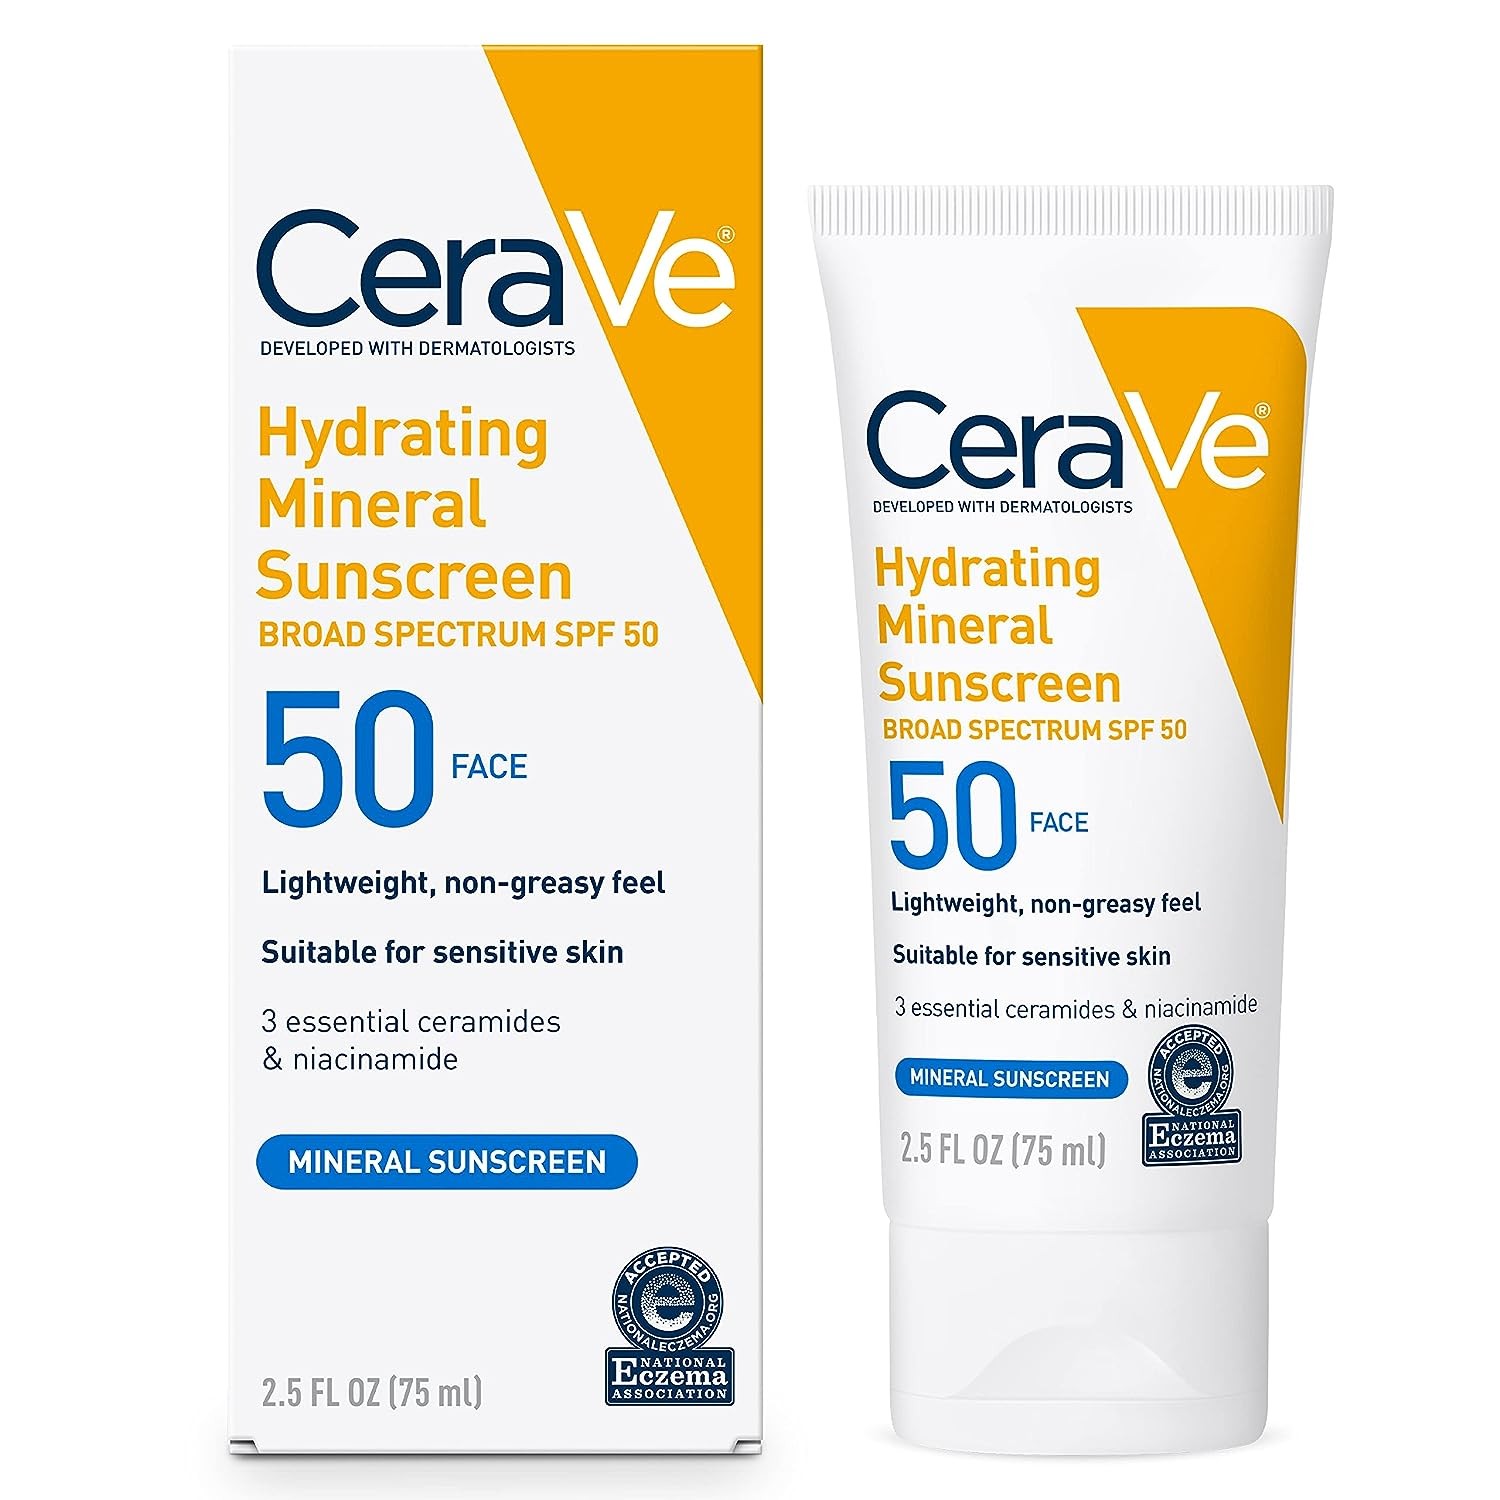 Full Coverage Hydrating Mineral Sunscreen Lotion SPF30